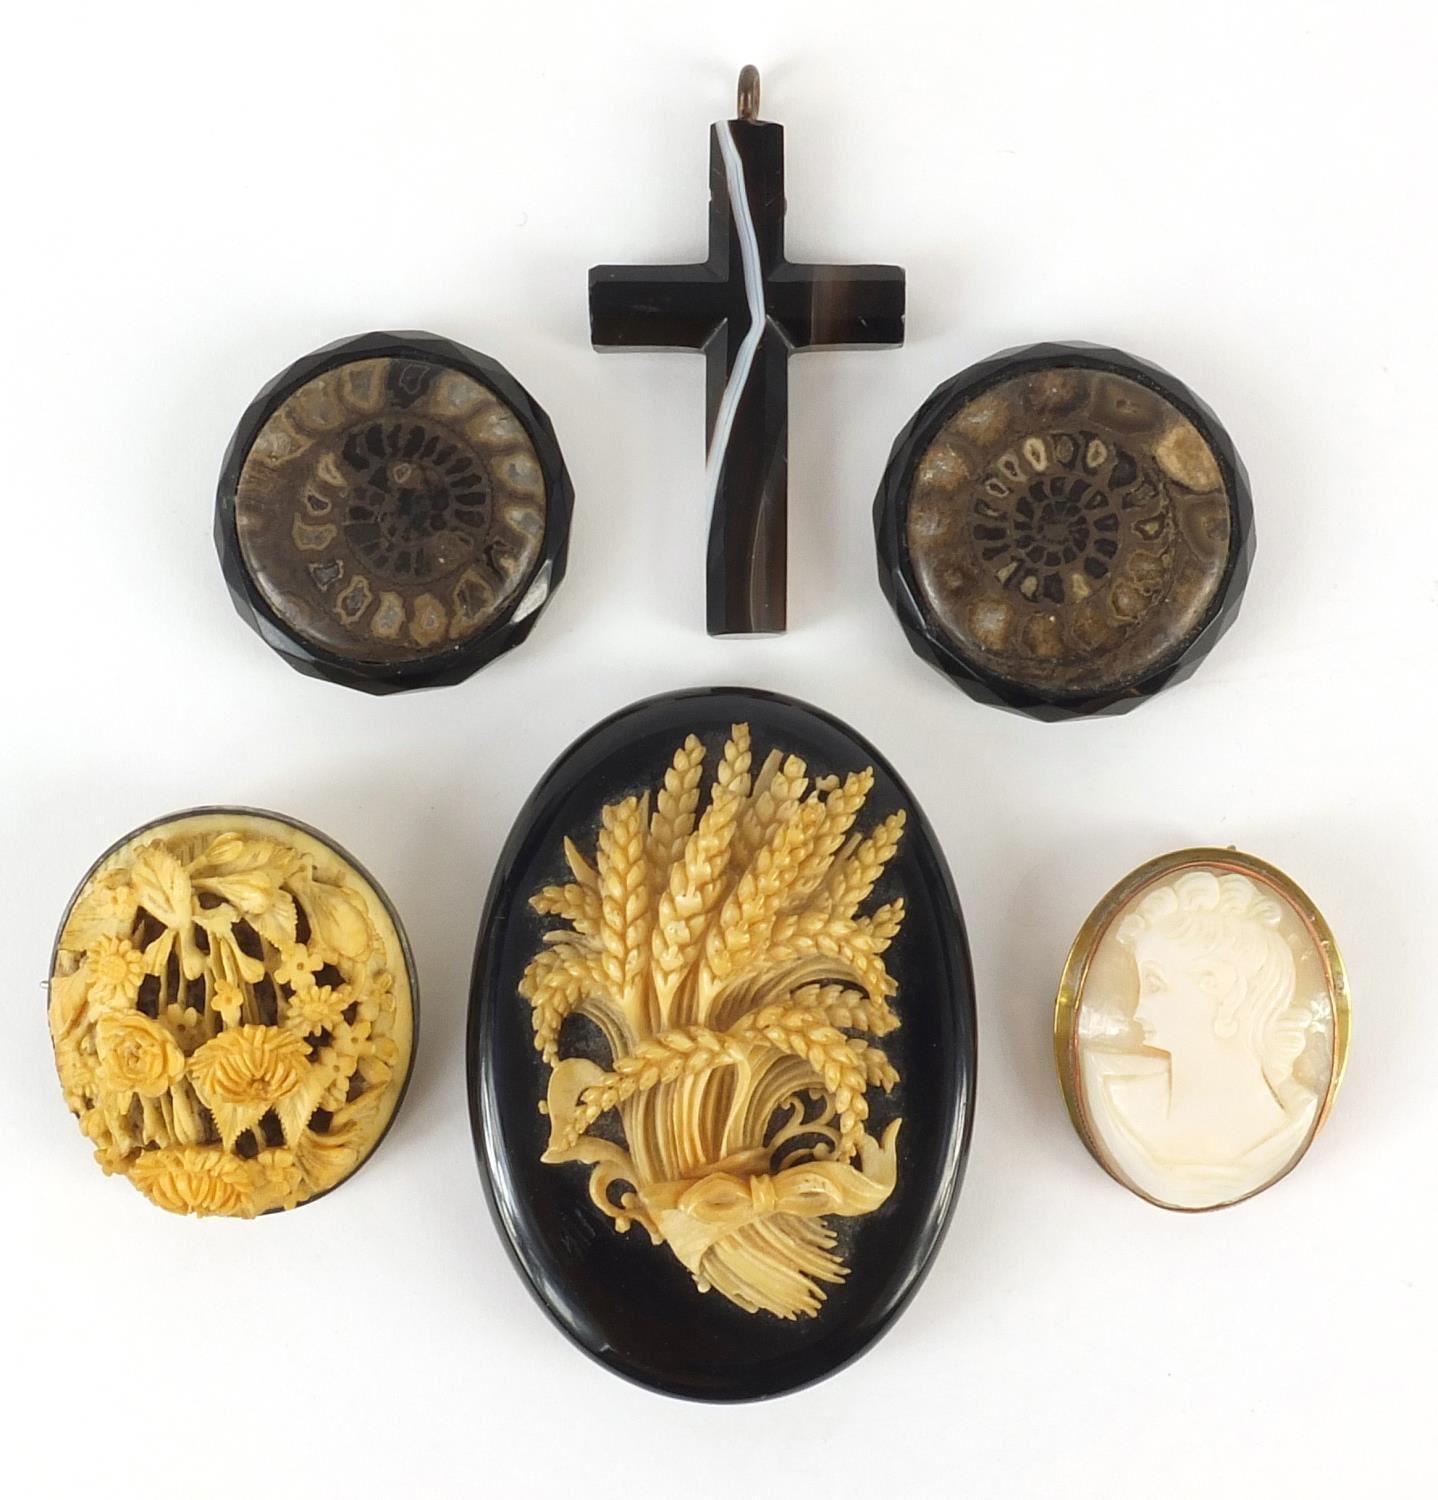 Antique jewellery including a large jet and carved ivory brooch, Scottish agate cross pendant and